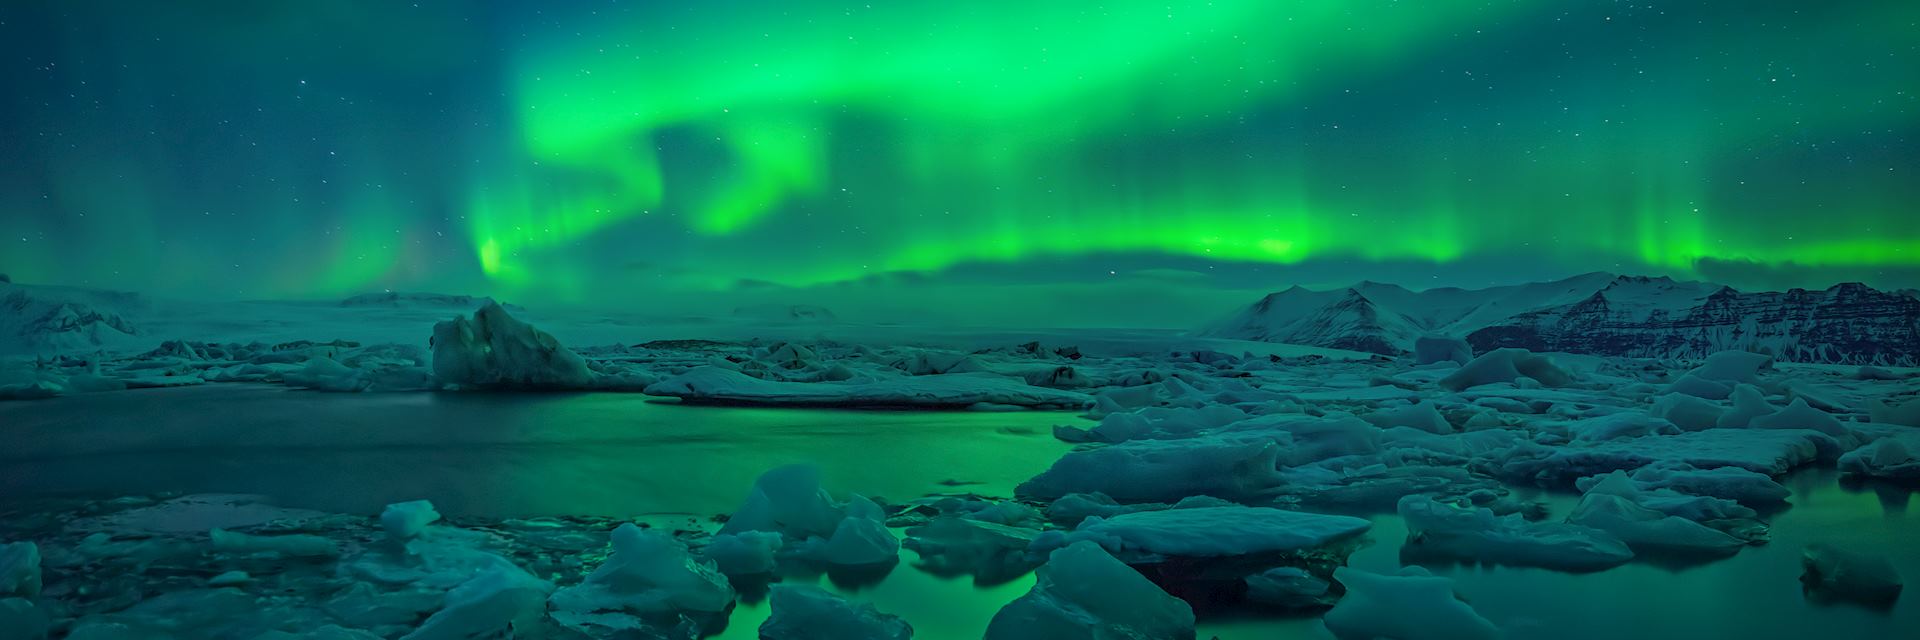 F.Kr. Lima hoste Guide to seeing the northern lights in Iceland | Audley Travel